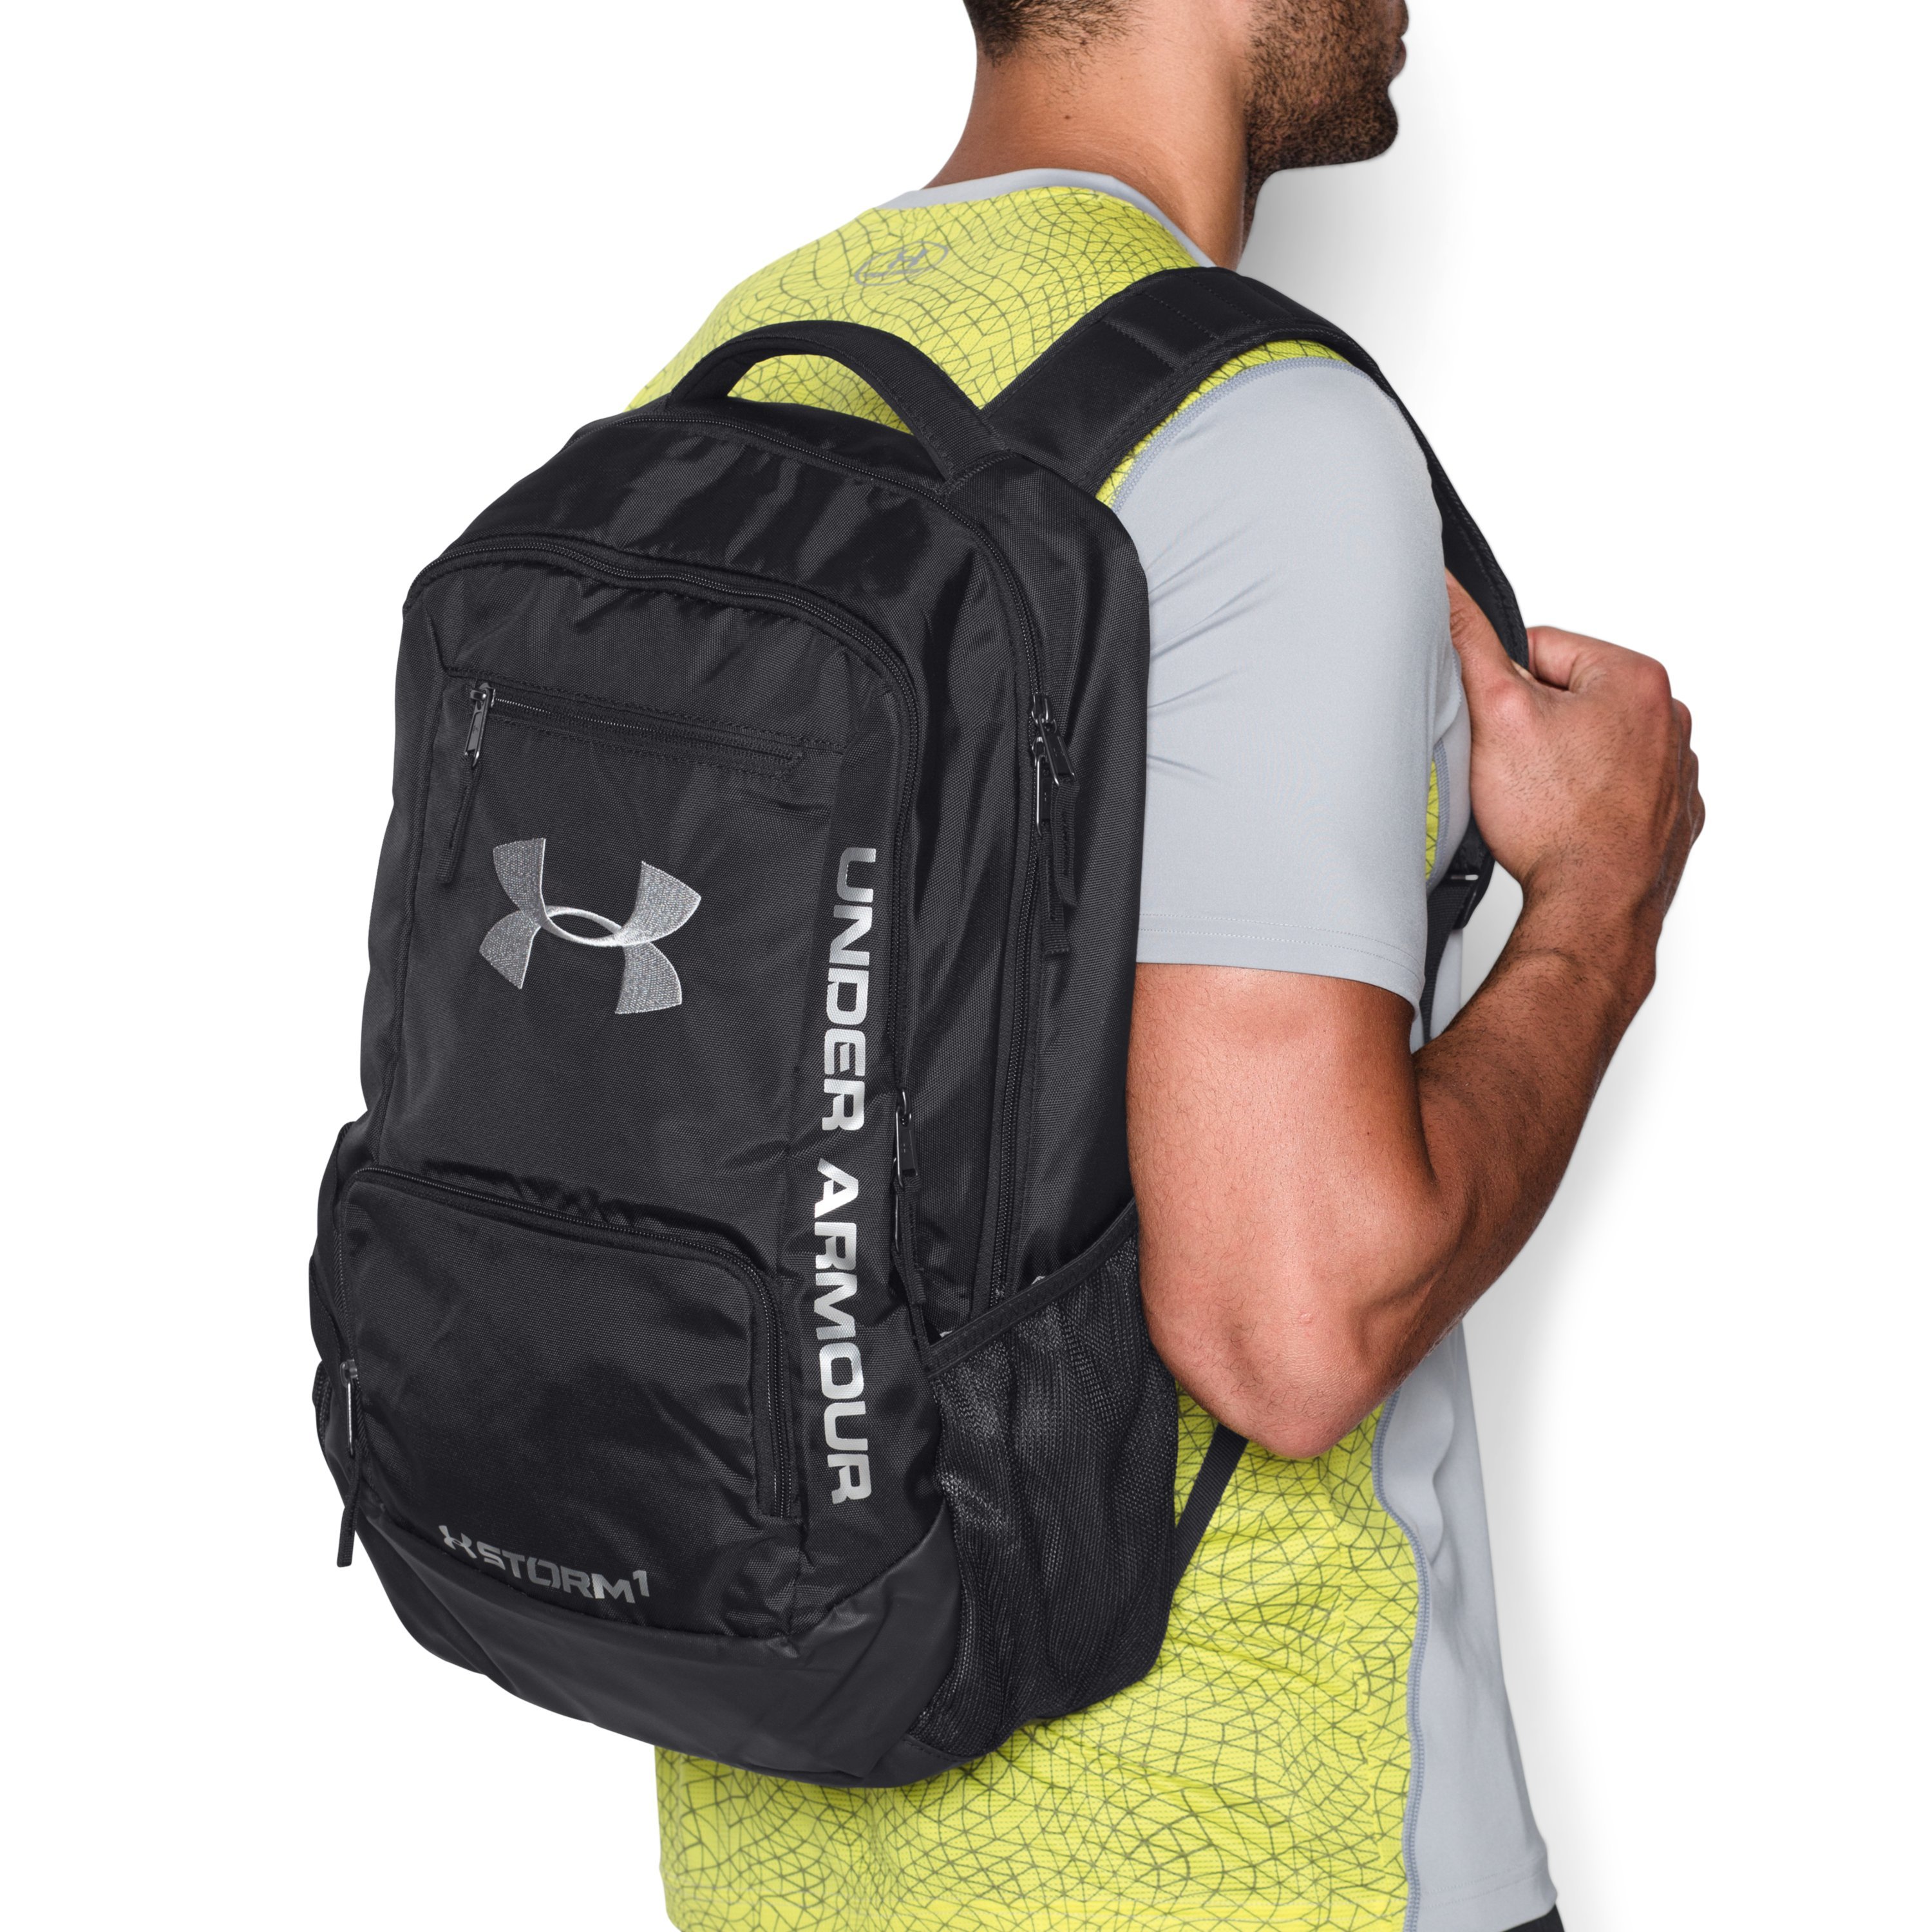 Mochila Storm Under Armour Online Deals, UP TO 60% OFF |  www.realliganaval.com